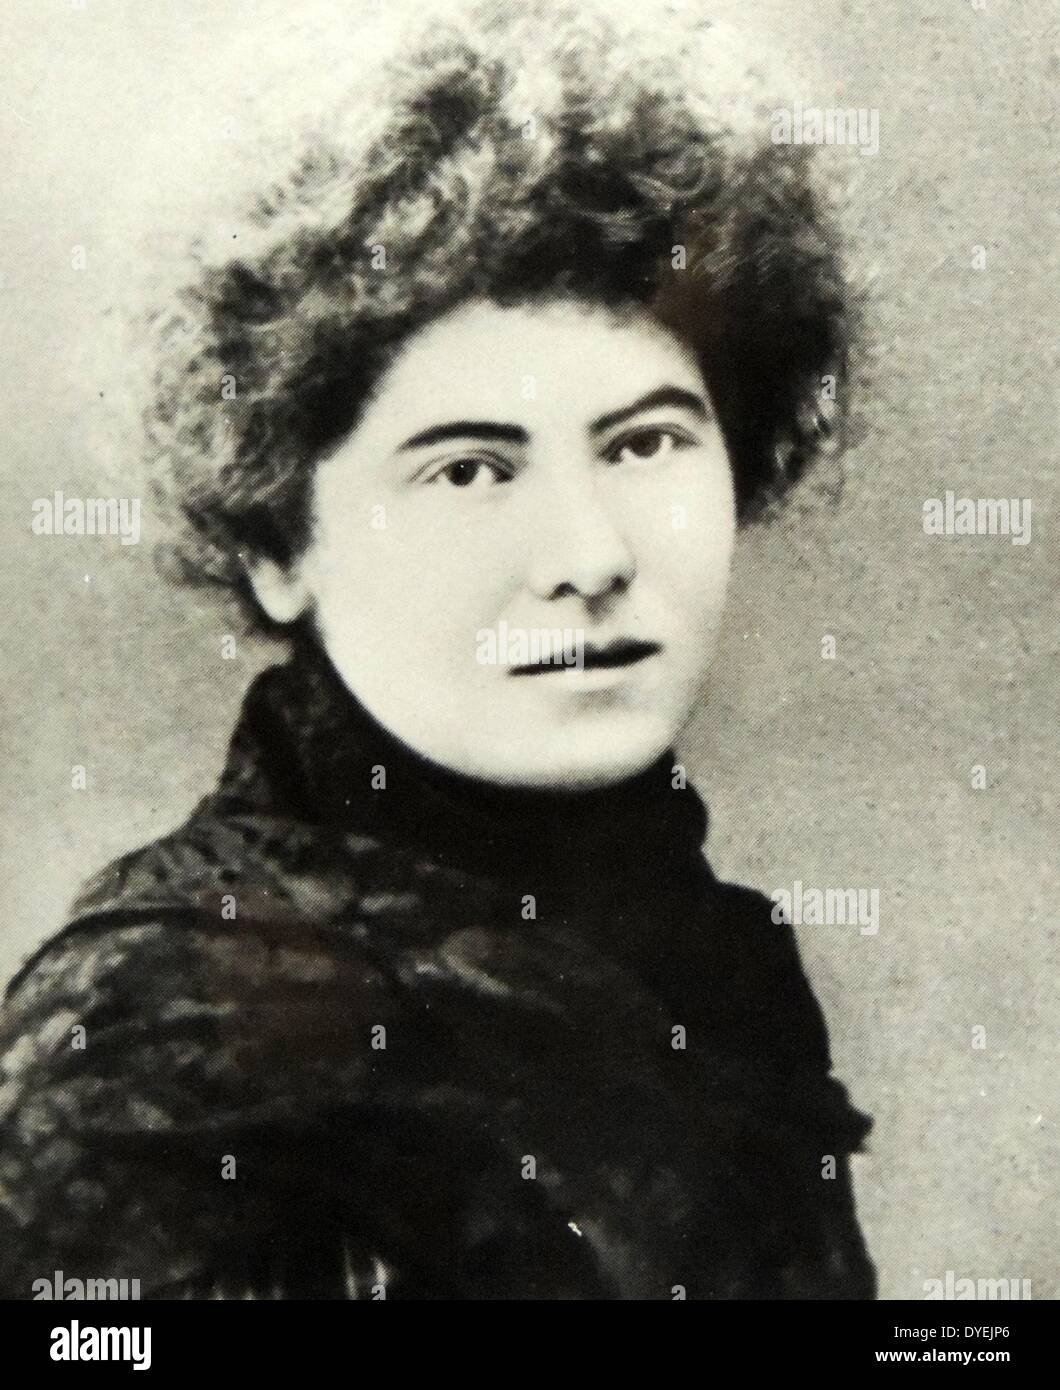 Jenny Laura Marx (26 September 1845 – 26 November 1911) was the second daughter of Karl Marx and Jenny von Westphalen. In 1868 she married Paul Lafargue. The two committed suicide together in 1911. Stock Photo